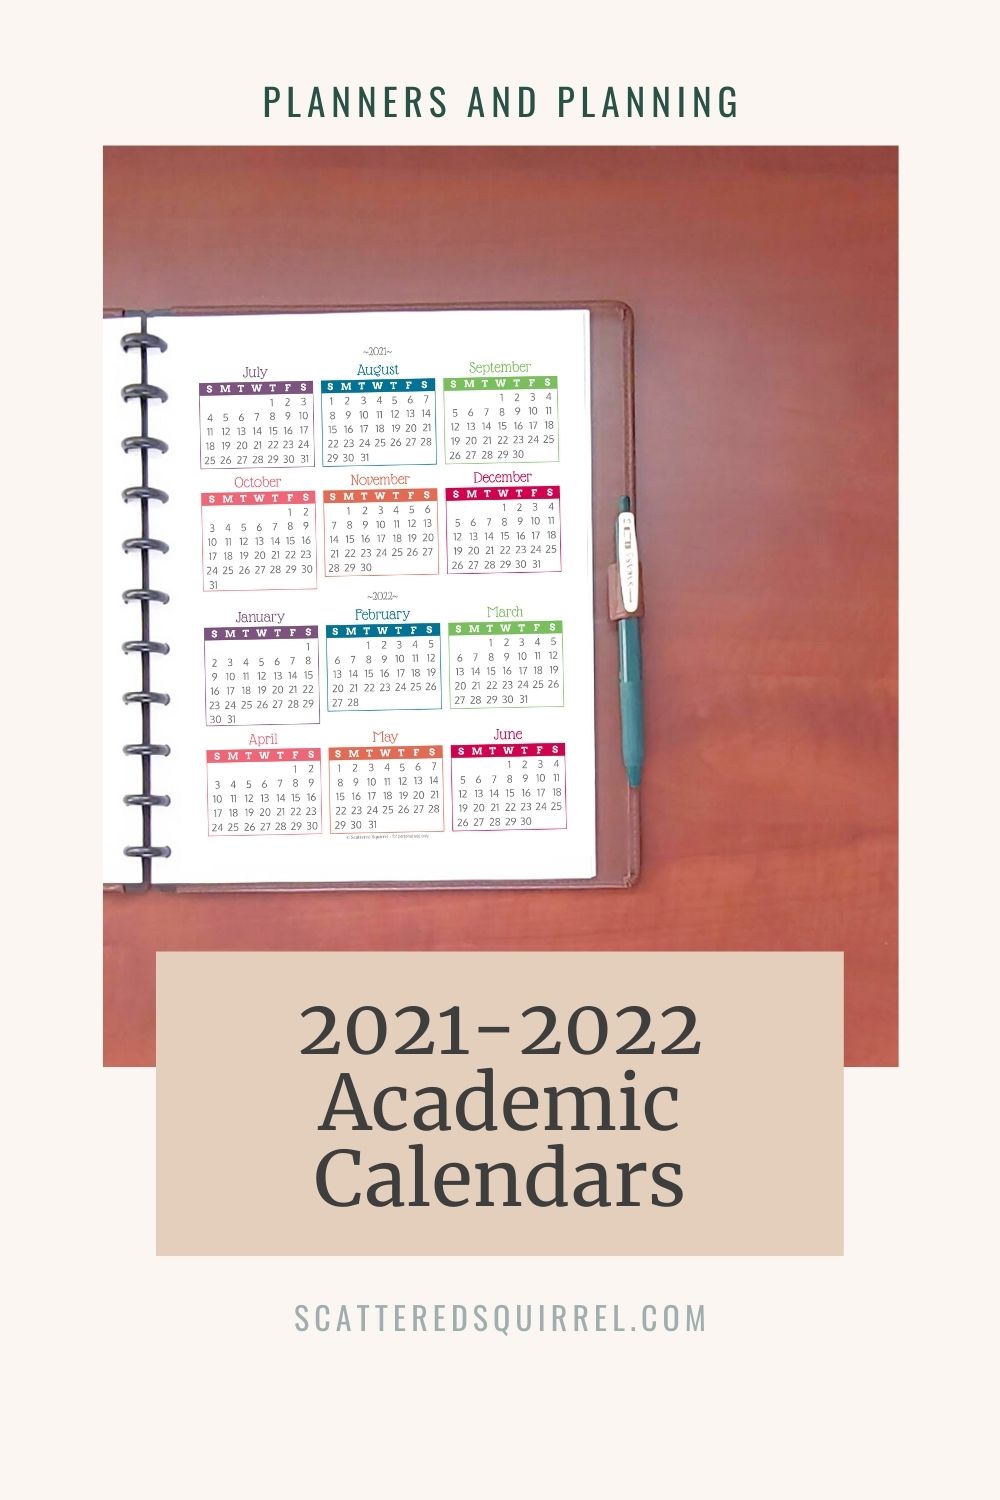 Start Planning the School Year with the 2021-2022 Academic Calendars